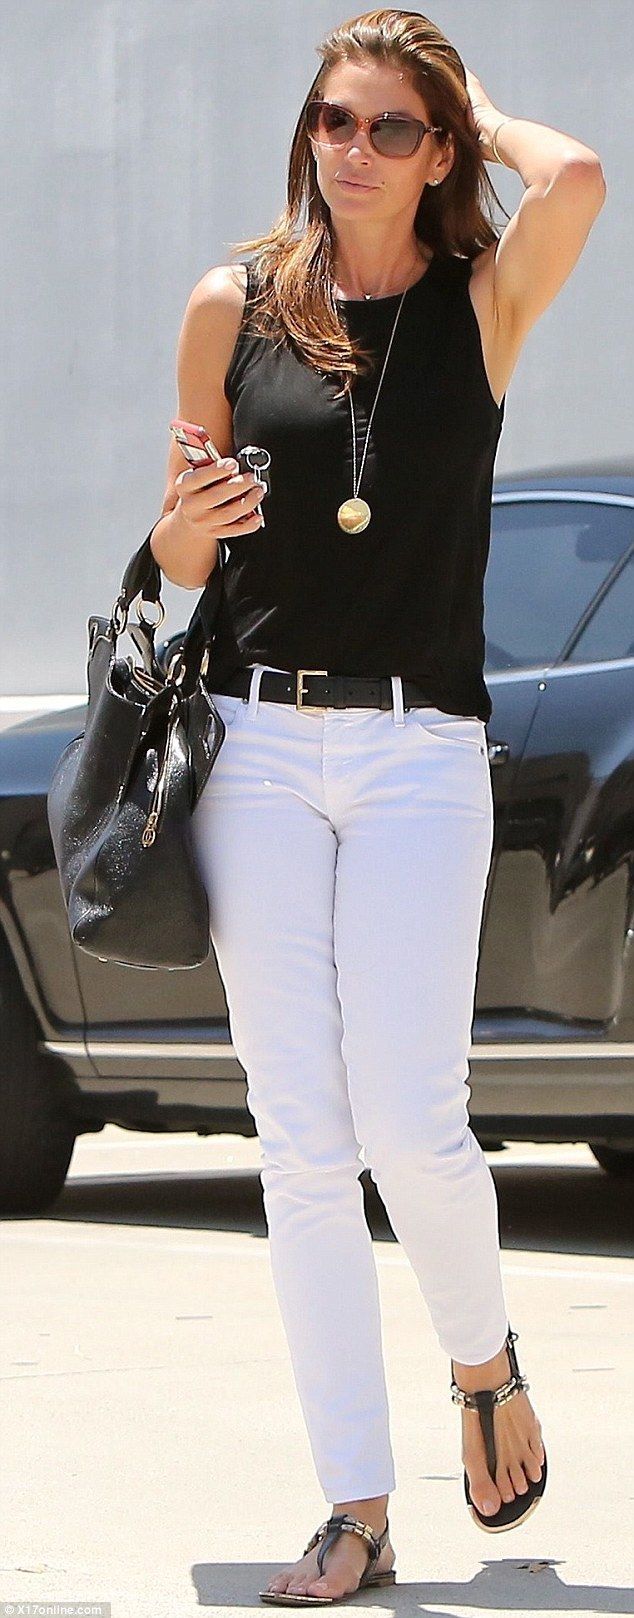 Effortlessly chic: Supermodel Cindy Crawford, 49, looks incredible in white jeans